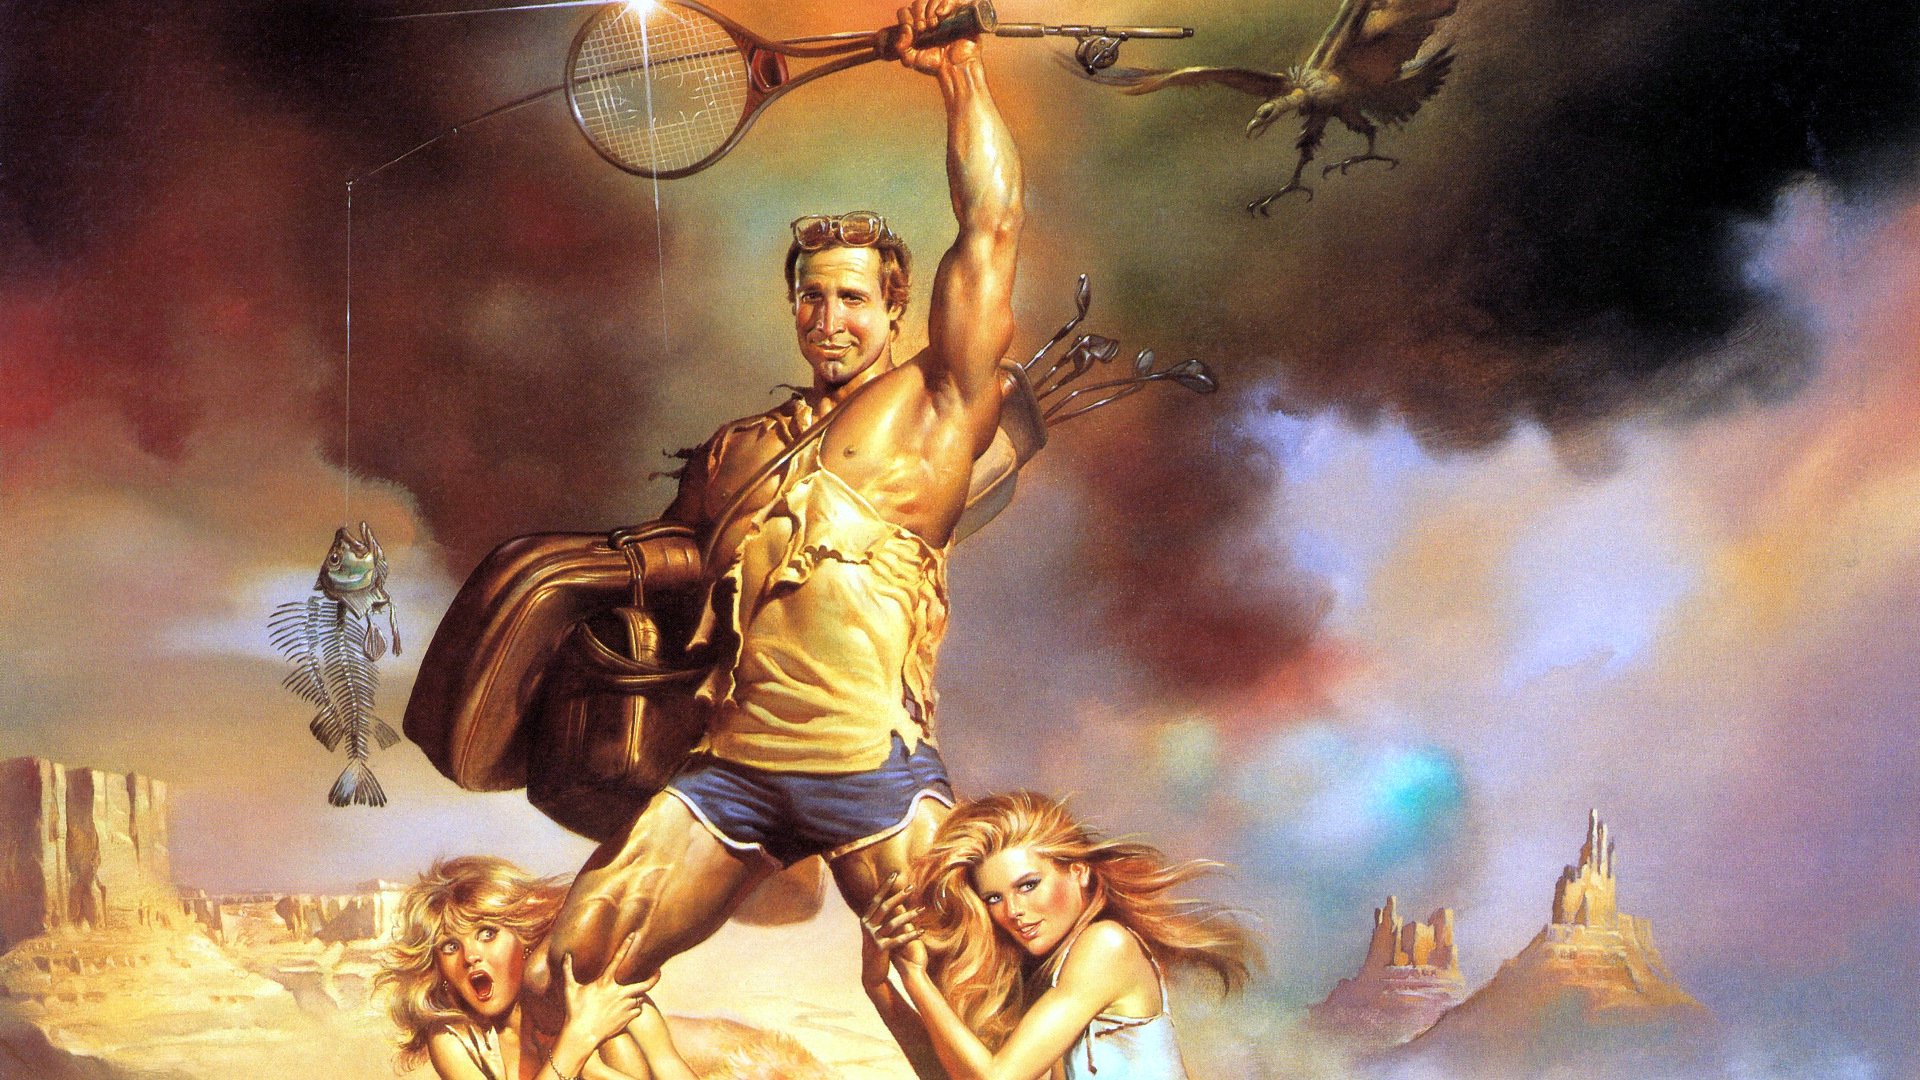 National Lampoon's Vacation HD Wallpapers and Backgrounds.